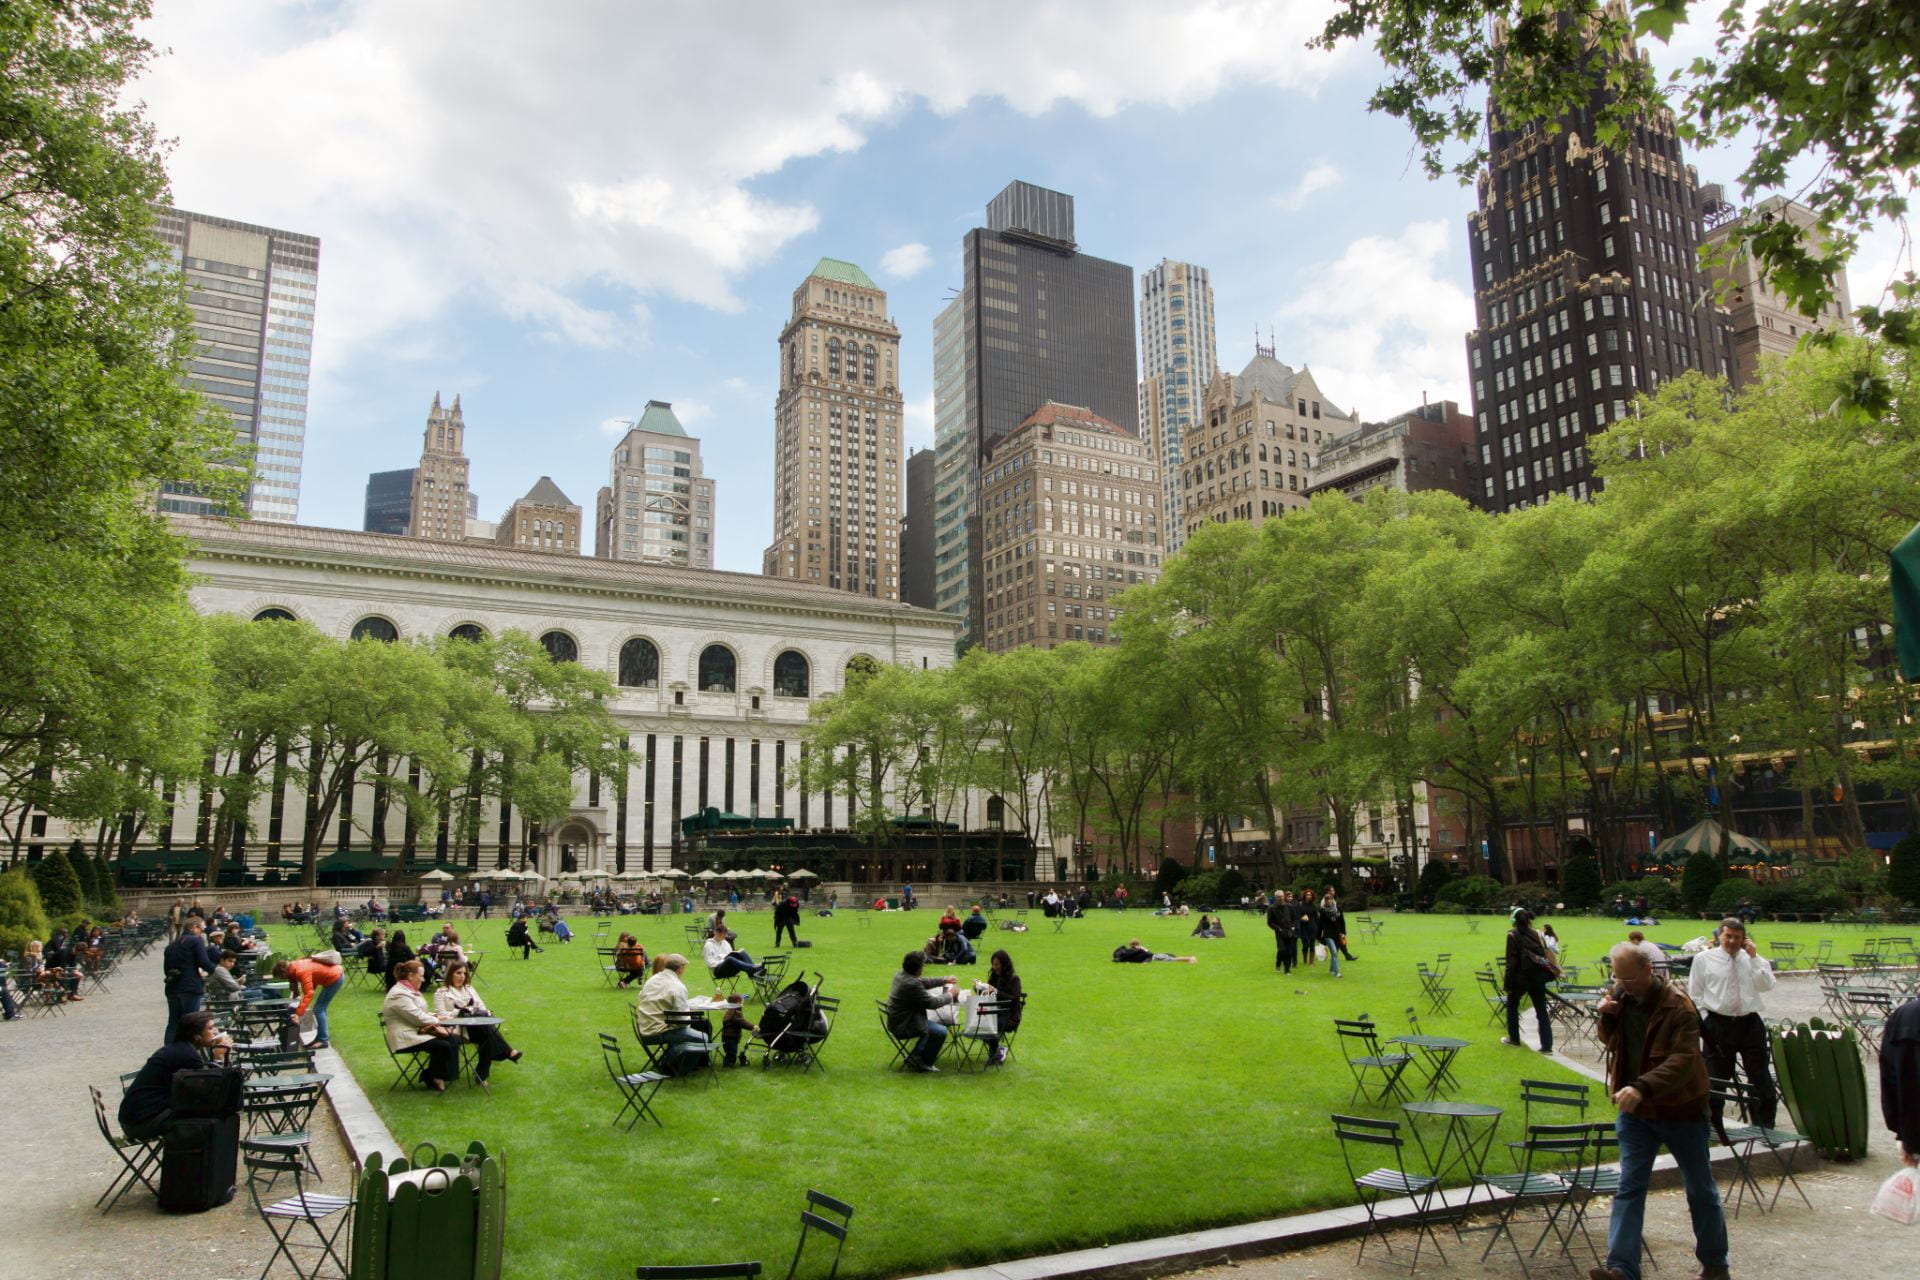 An image of people enjoying green spaces in Bryant Park in New York City